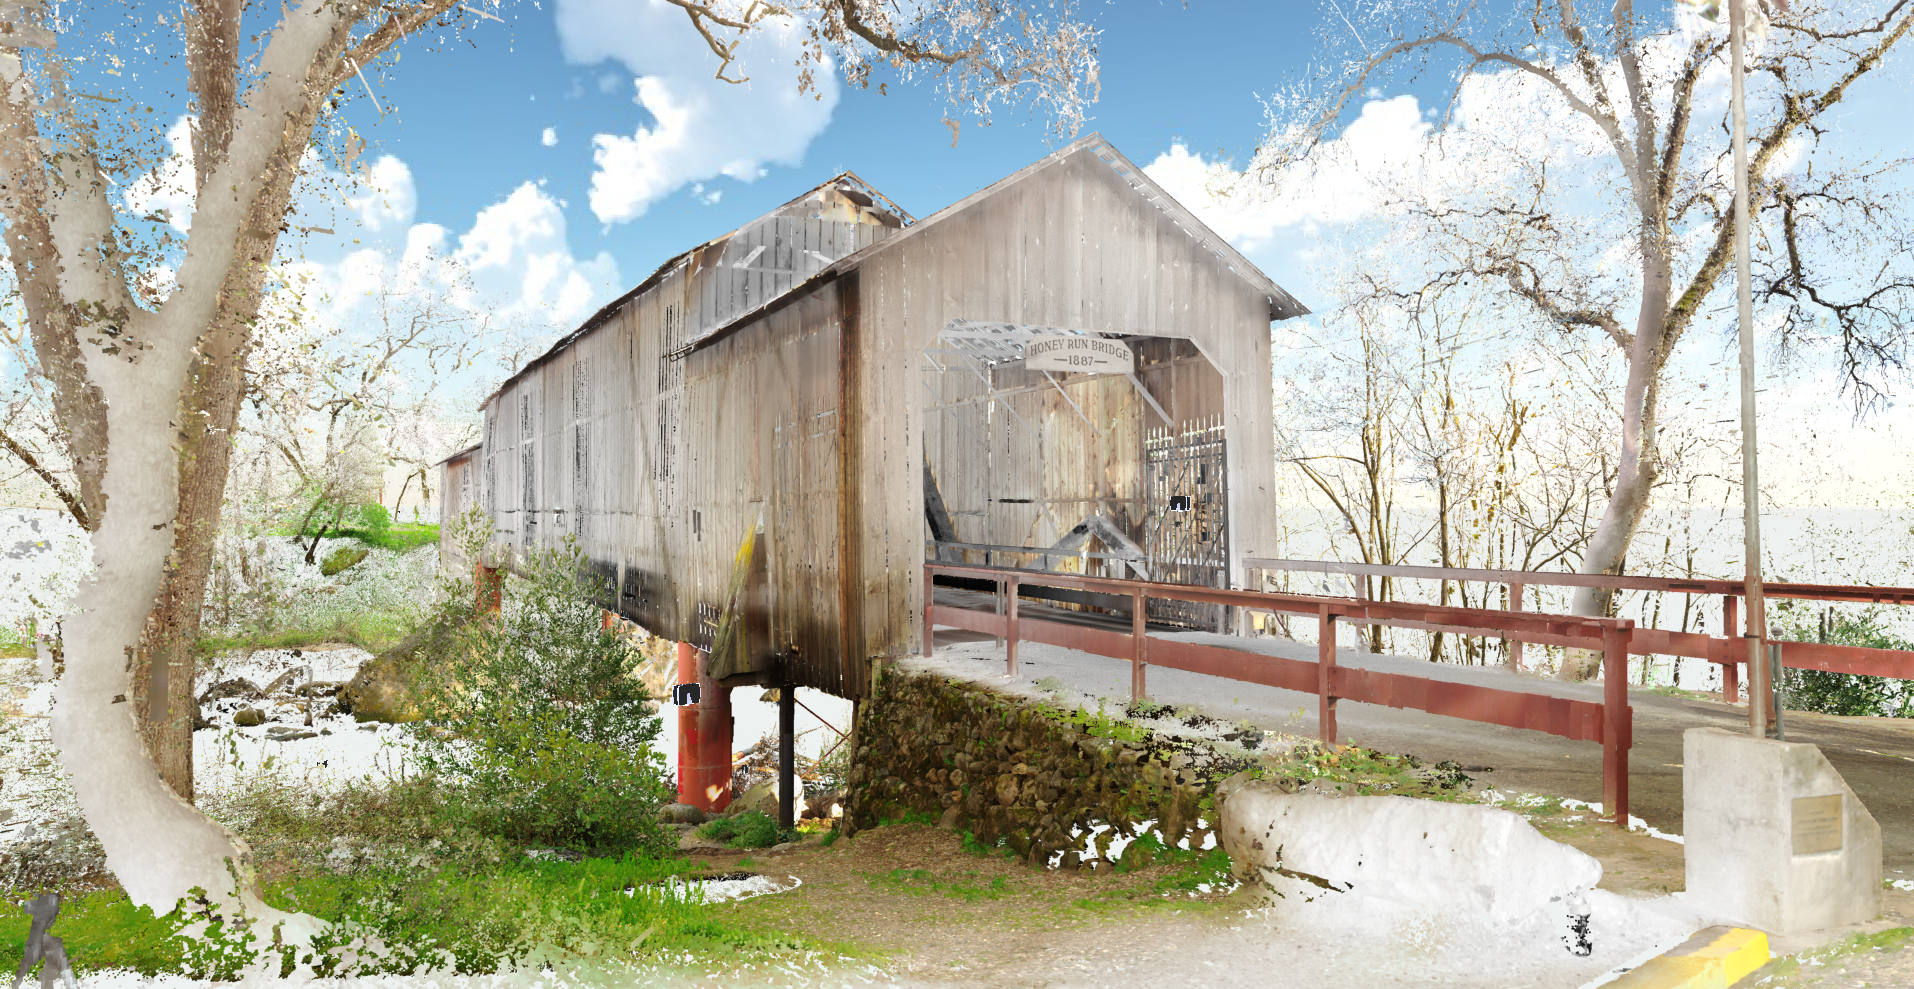 A screenshot of video showing virtual reality rendering of the Honey Run Covered Bridge,.